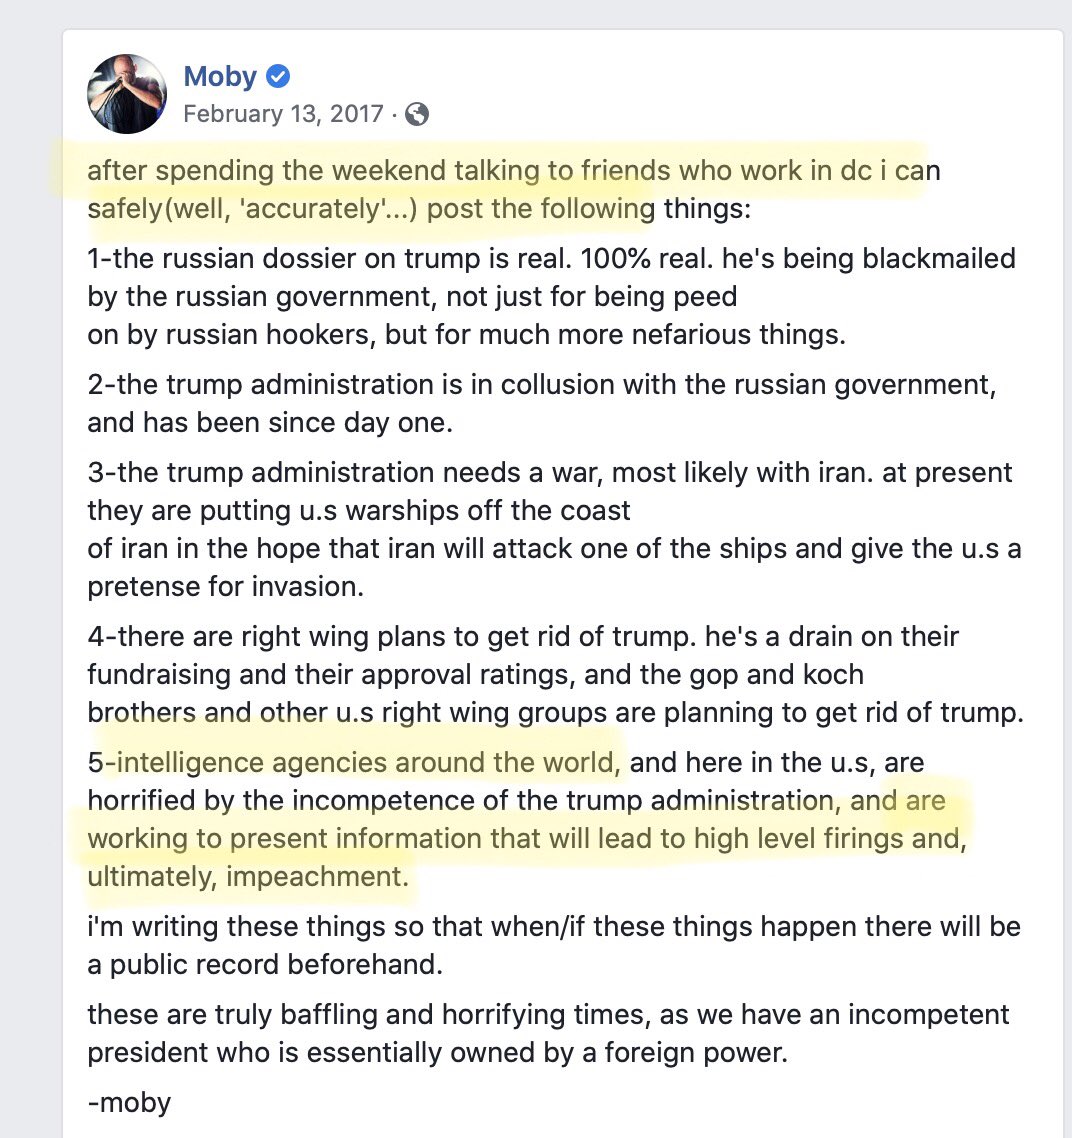 1. A story that once seemed insane but now seems absolutely plausible: how  @AdamSchiff  @CIA  @FBI used Moby and a drug-addicted, Ukrainian musician/hacker in the planned coup against  @POTUS. 2/17 Moby said (among other things) foreign intel were working together to Impeach Trump